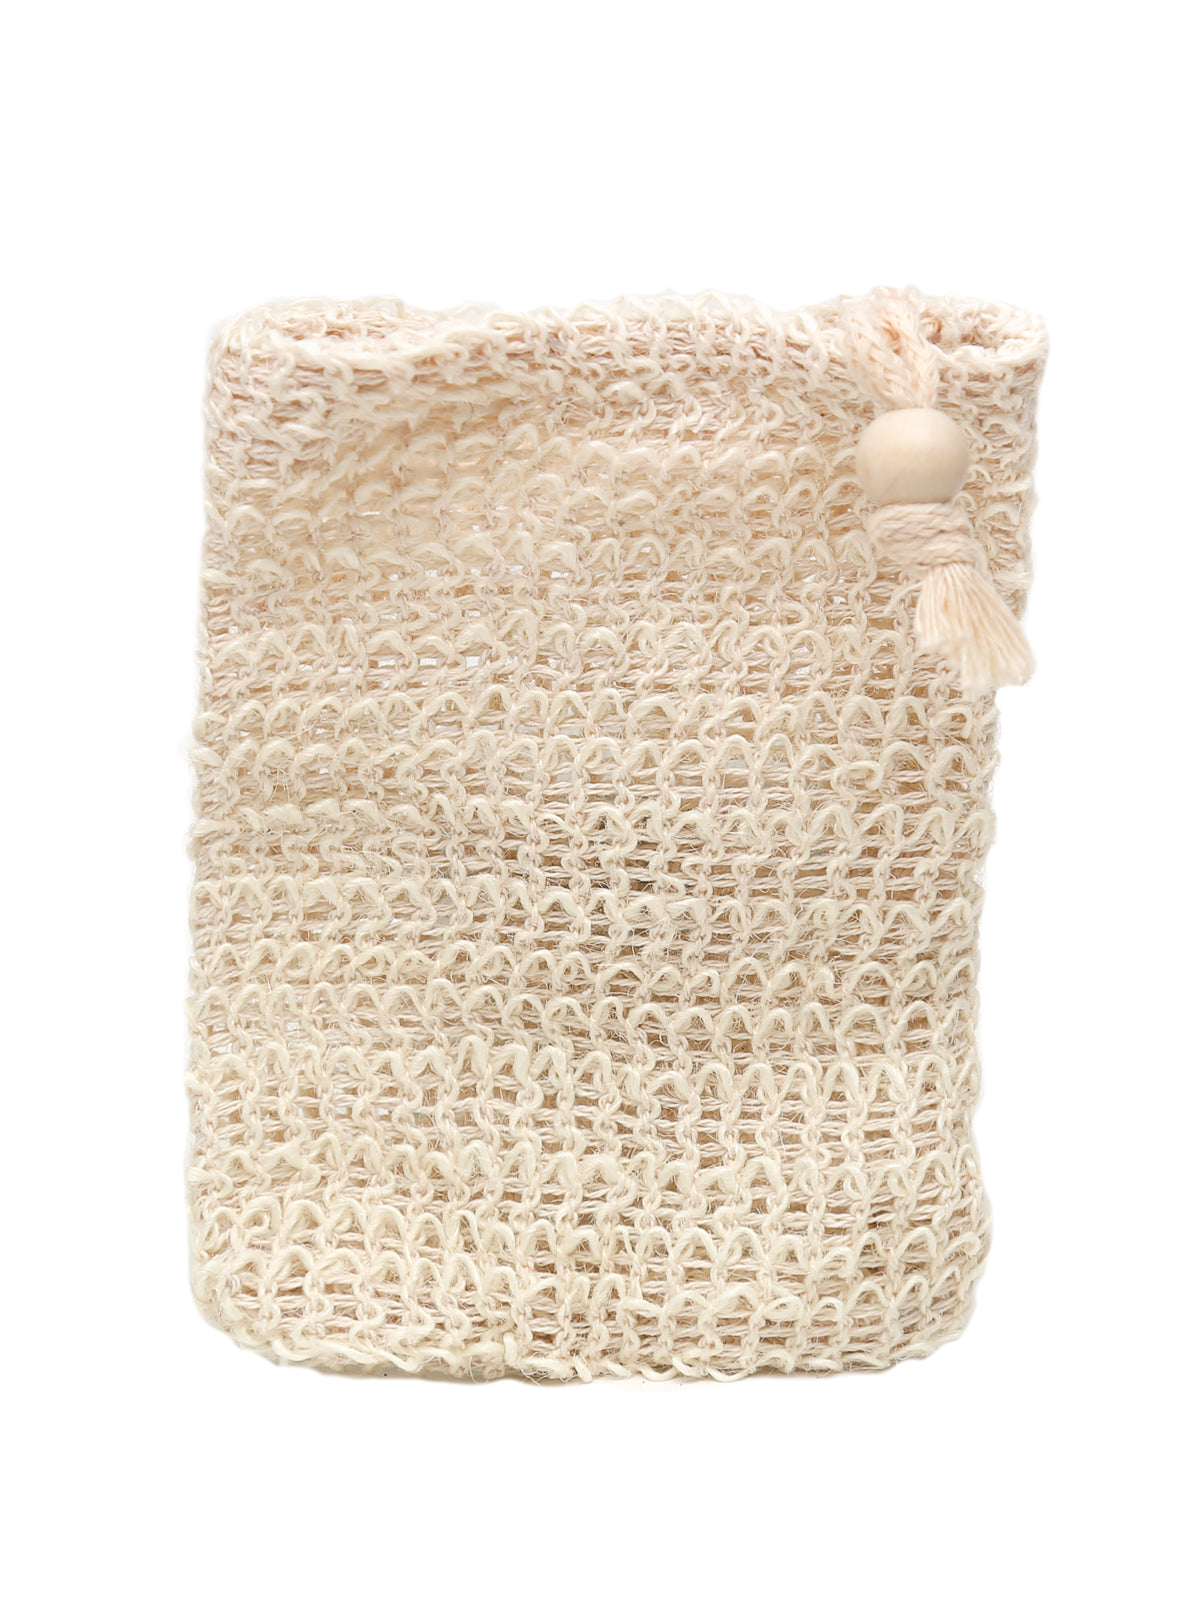 Exfoliating Sisal Soap Pouch